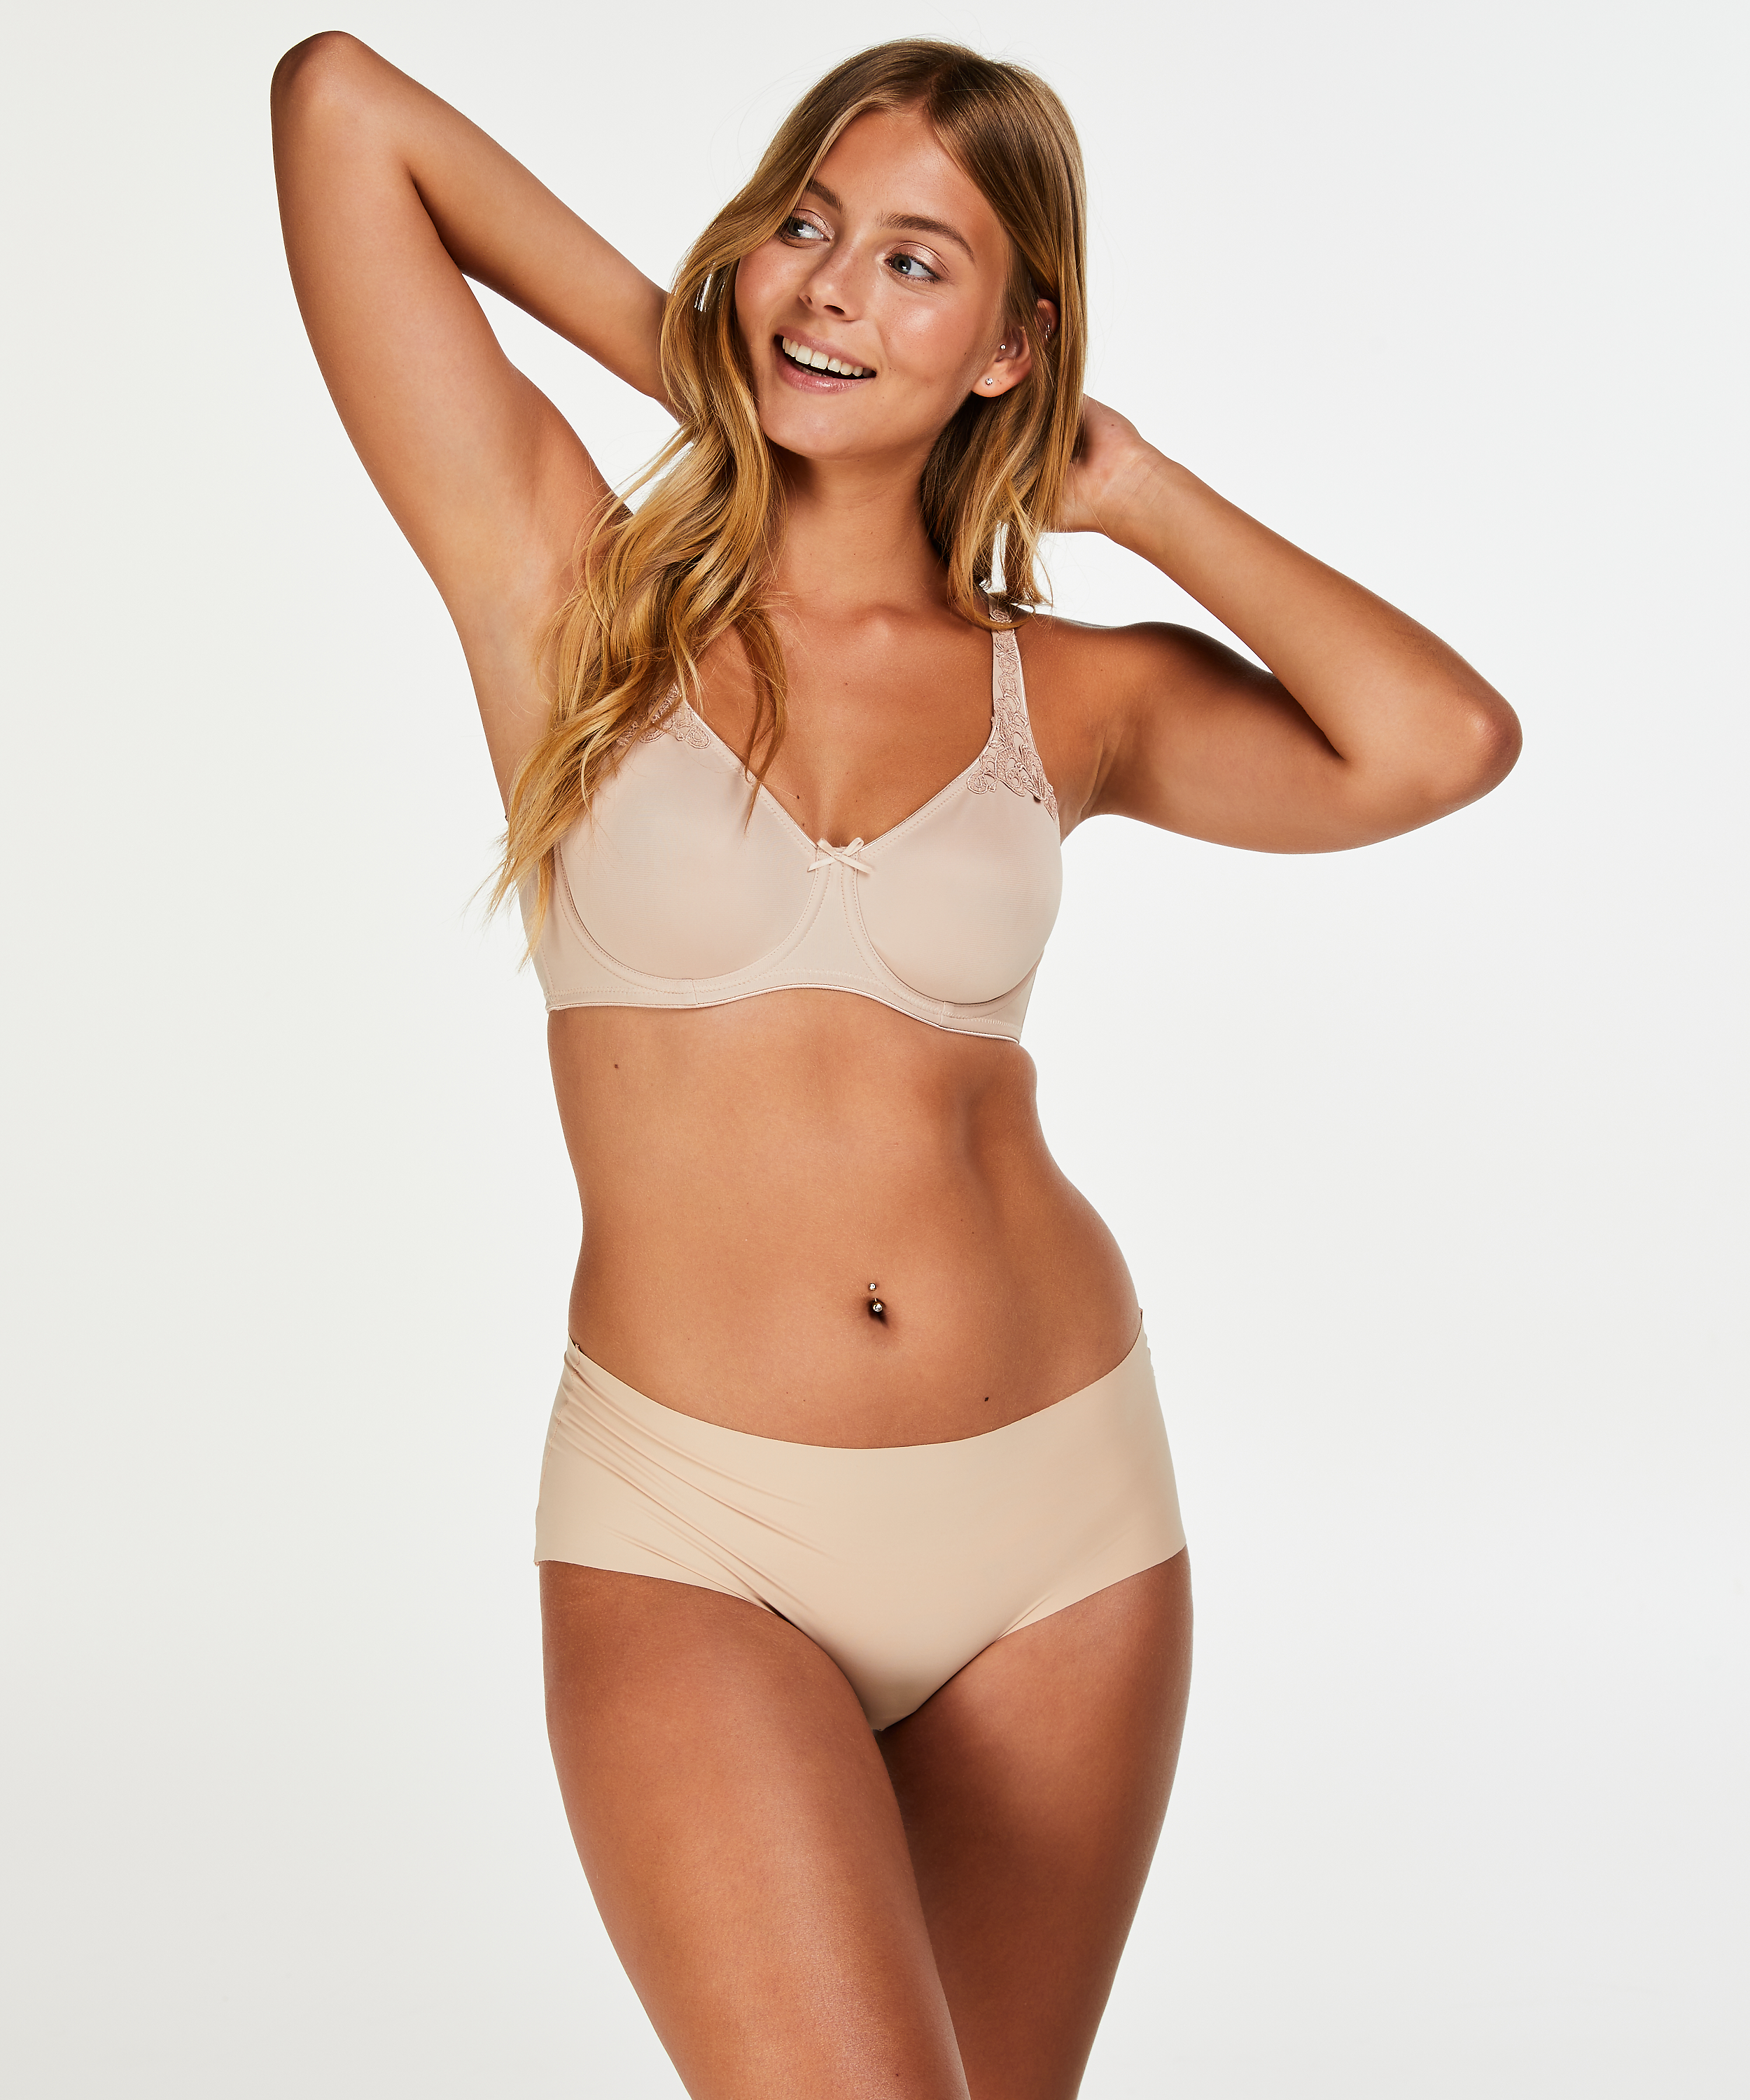 3-pakning Invisible shorts, Beige, main